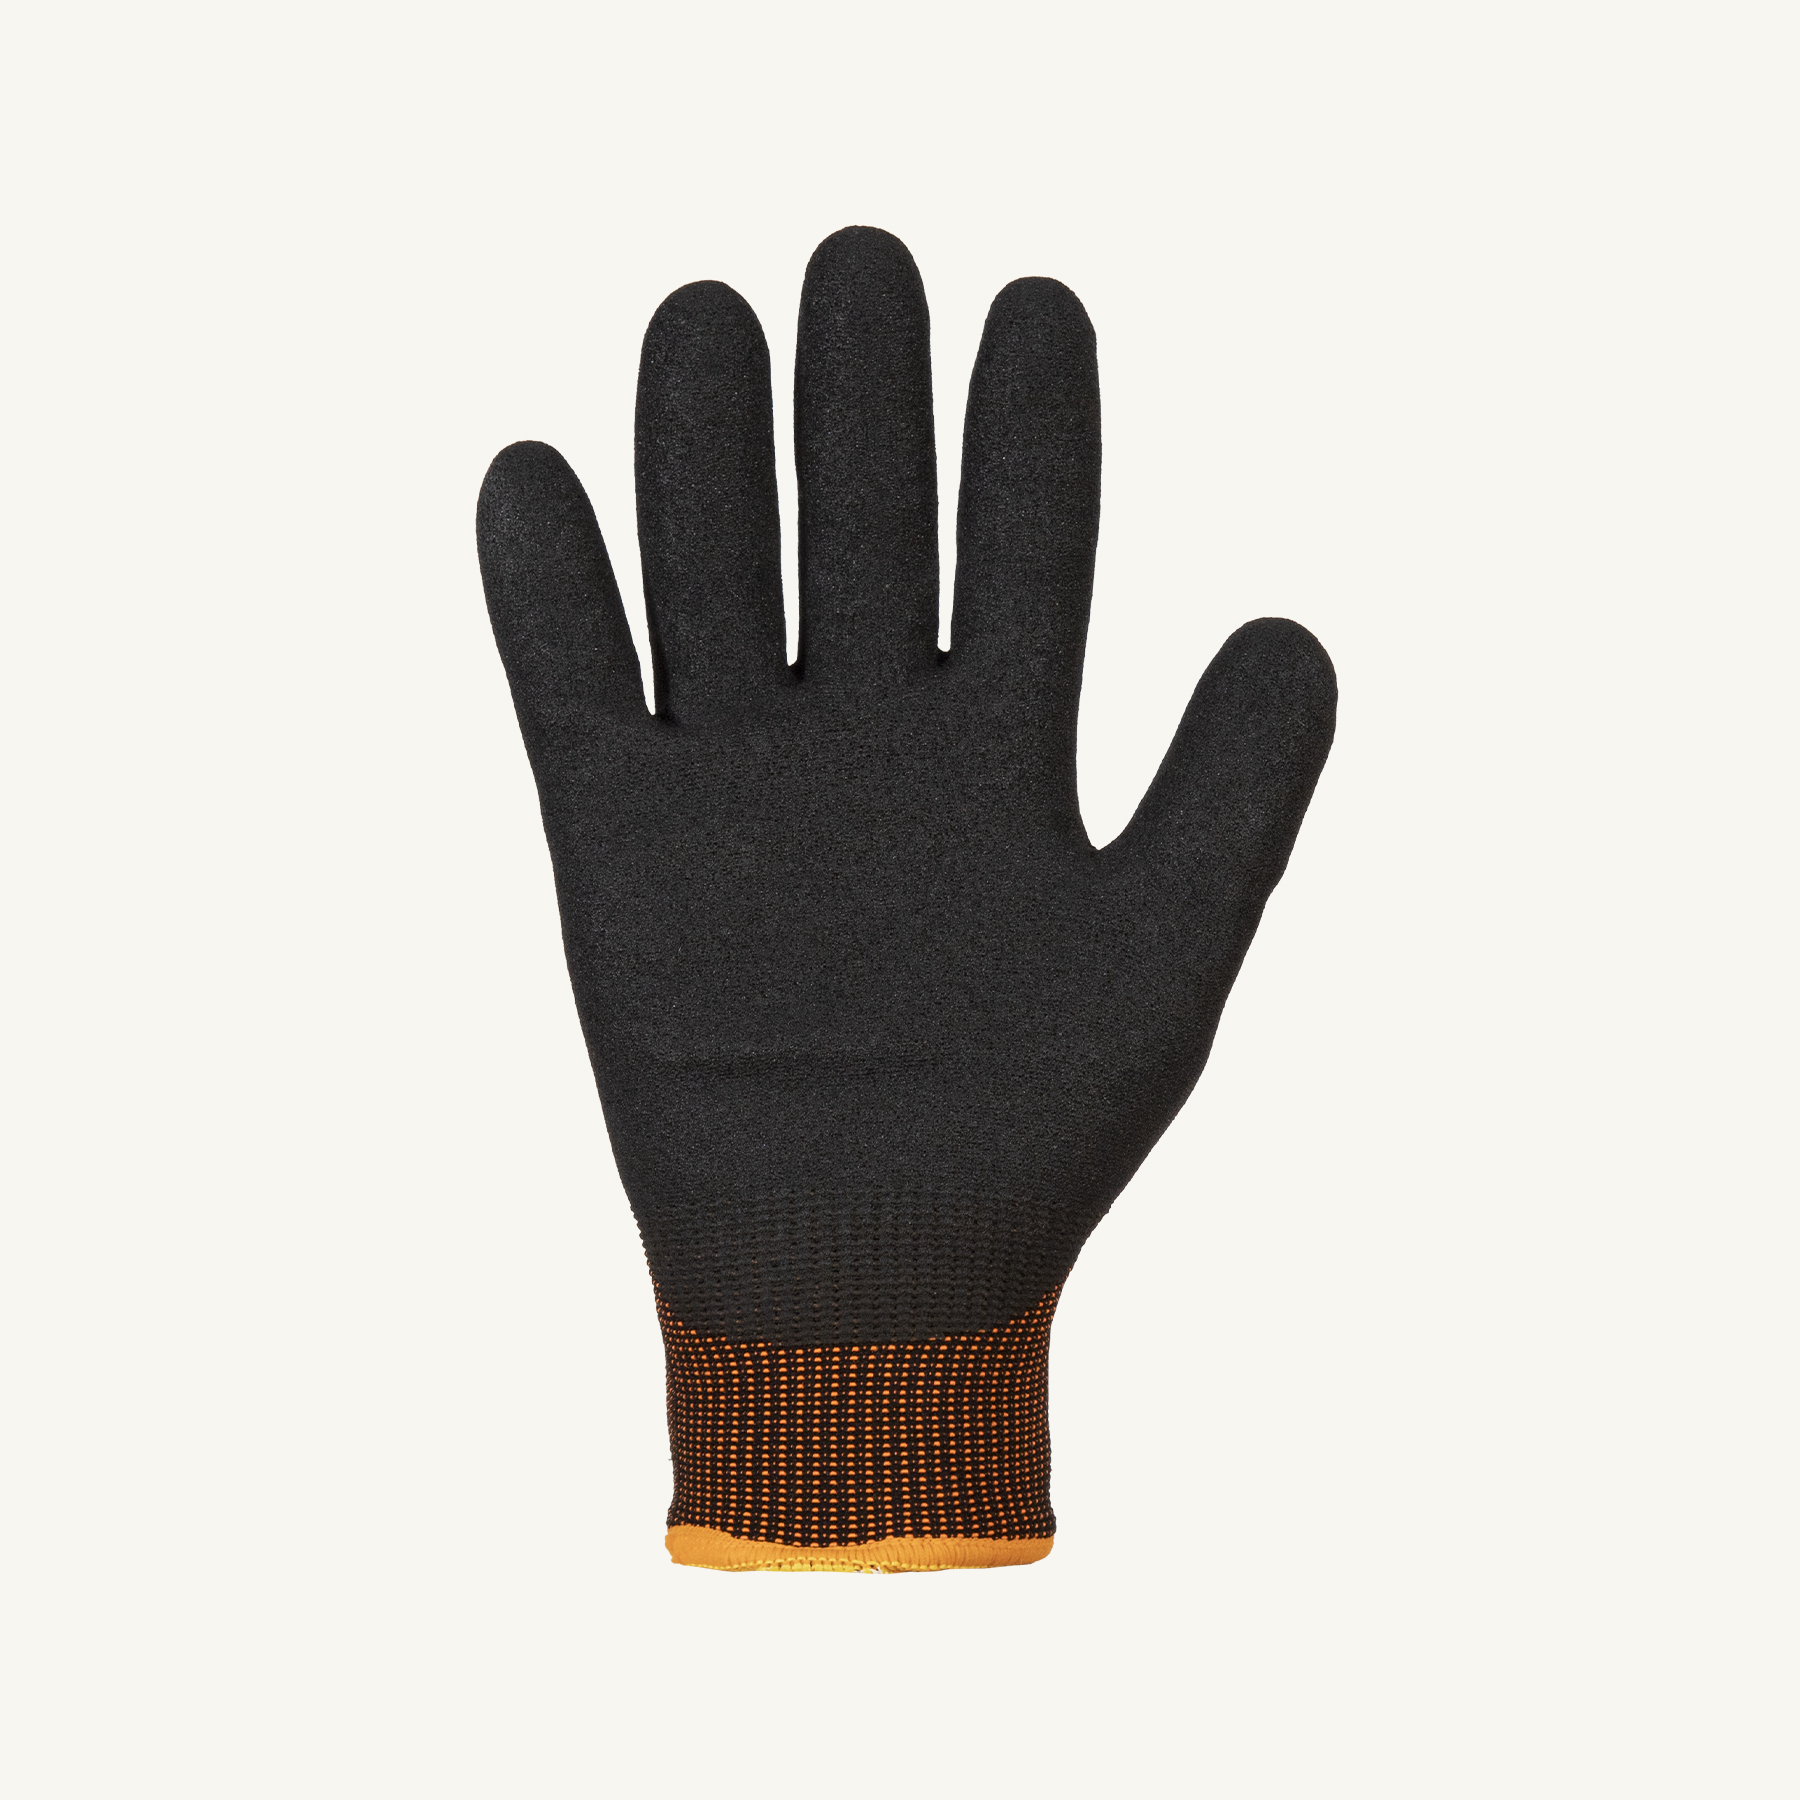 SNTAPVCD - Superior Glove® Dexterity® 3/4 PVC Coated Work Gloves